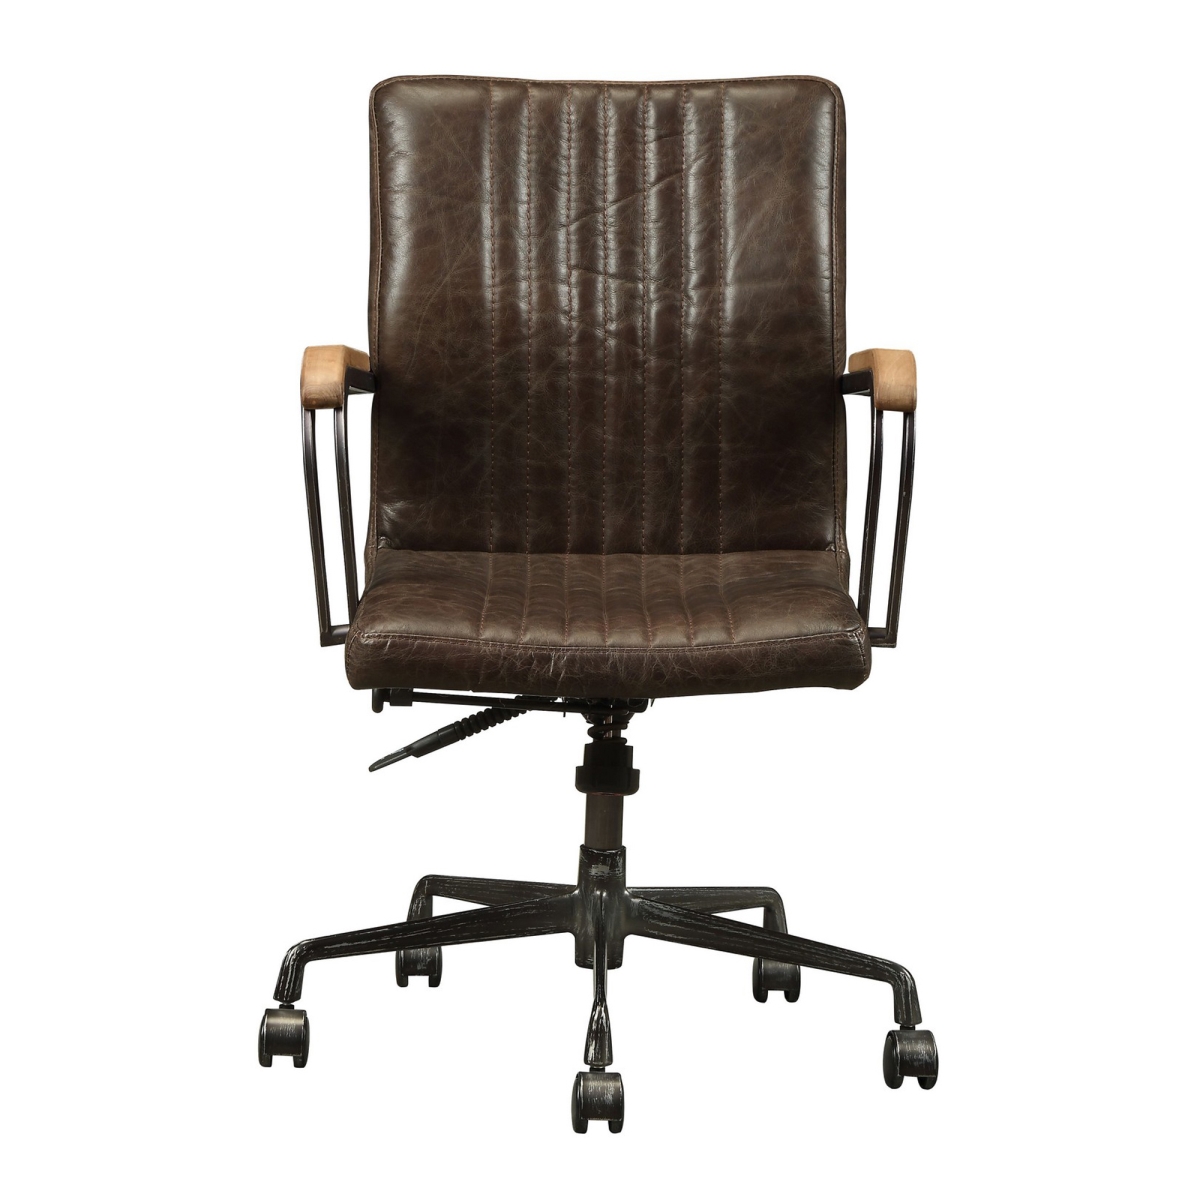 351889 Leatherette Upholstered Metal Swivel Executive Chair With Curved Wooden Armrest, Brown & Black